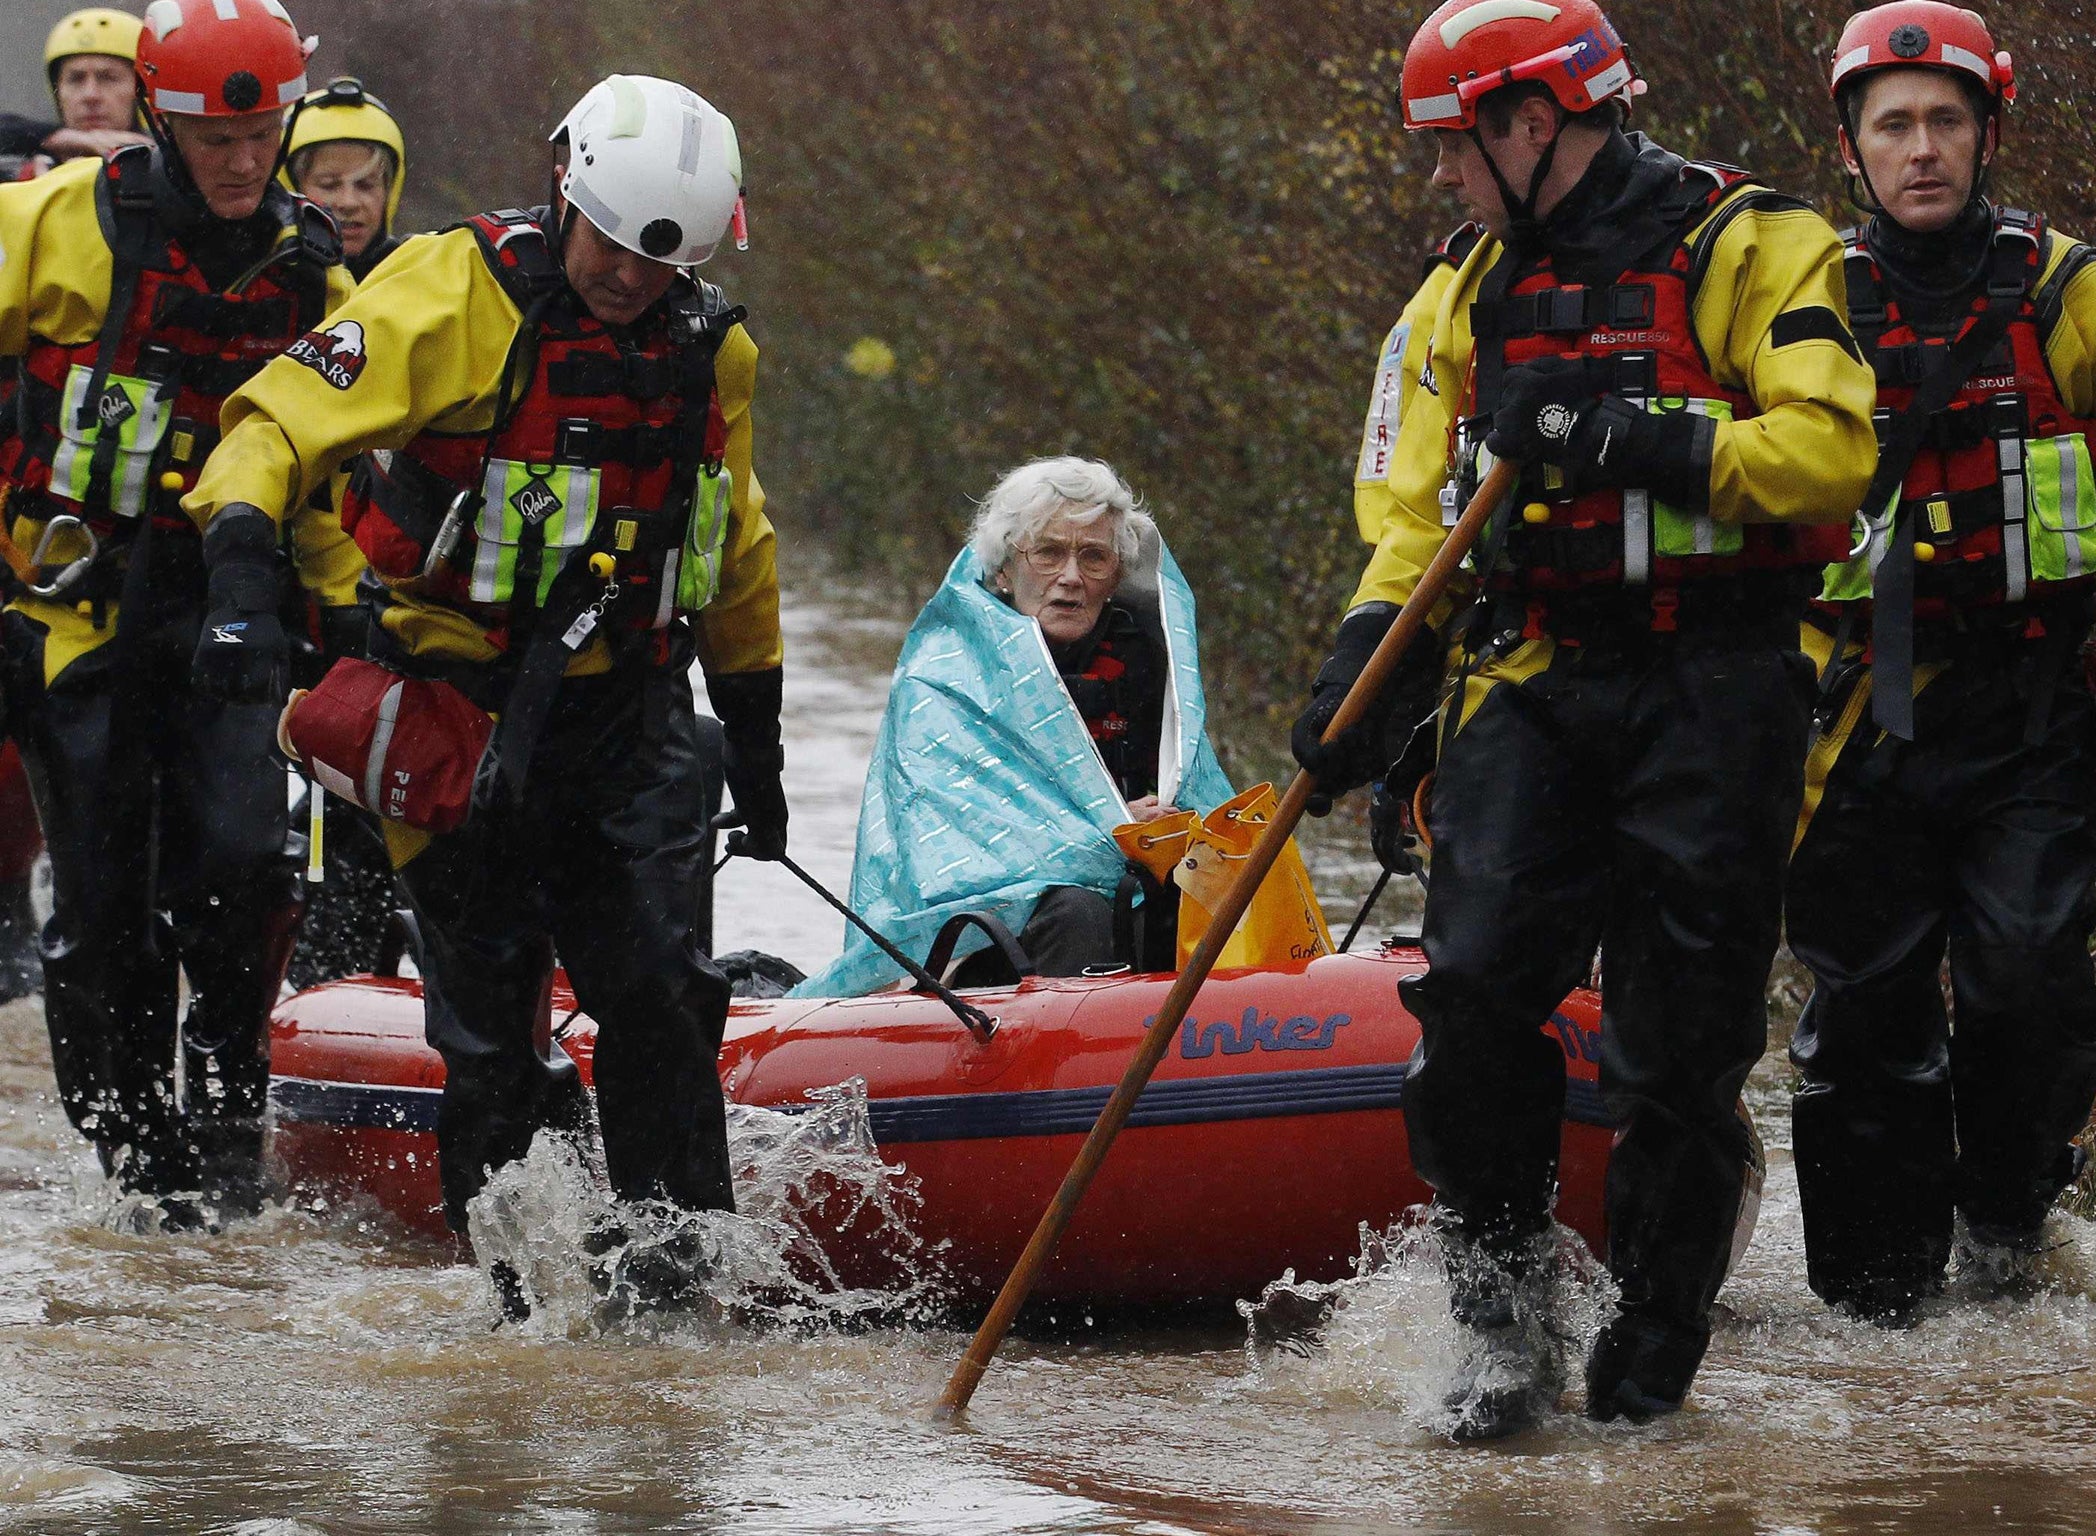 Rescued: The scene in Somerset yesterday